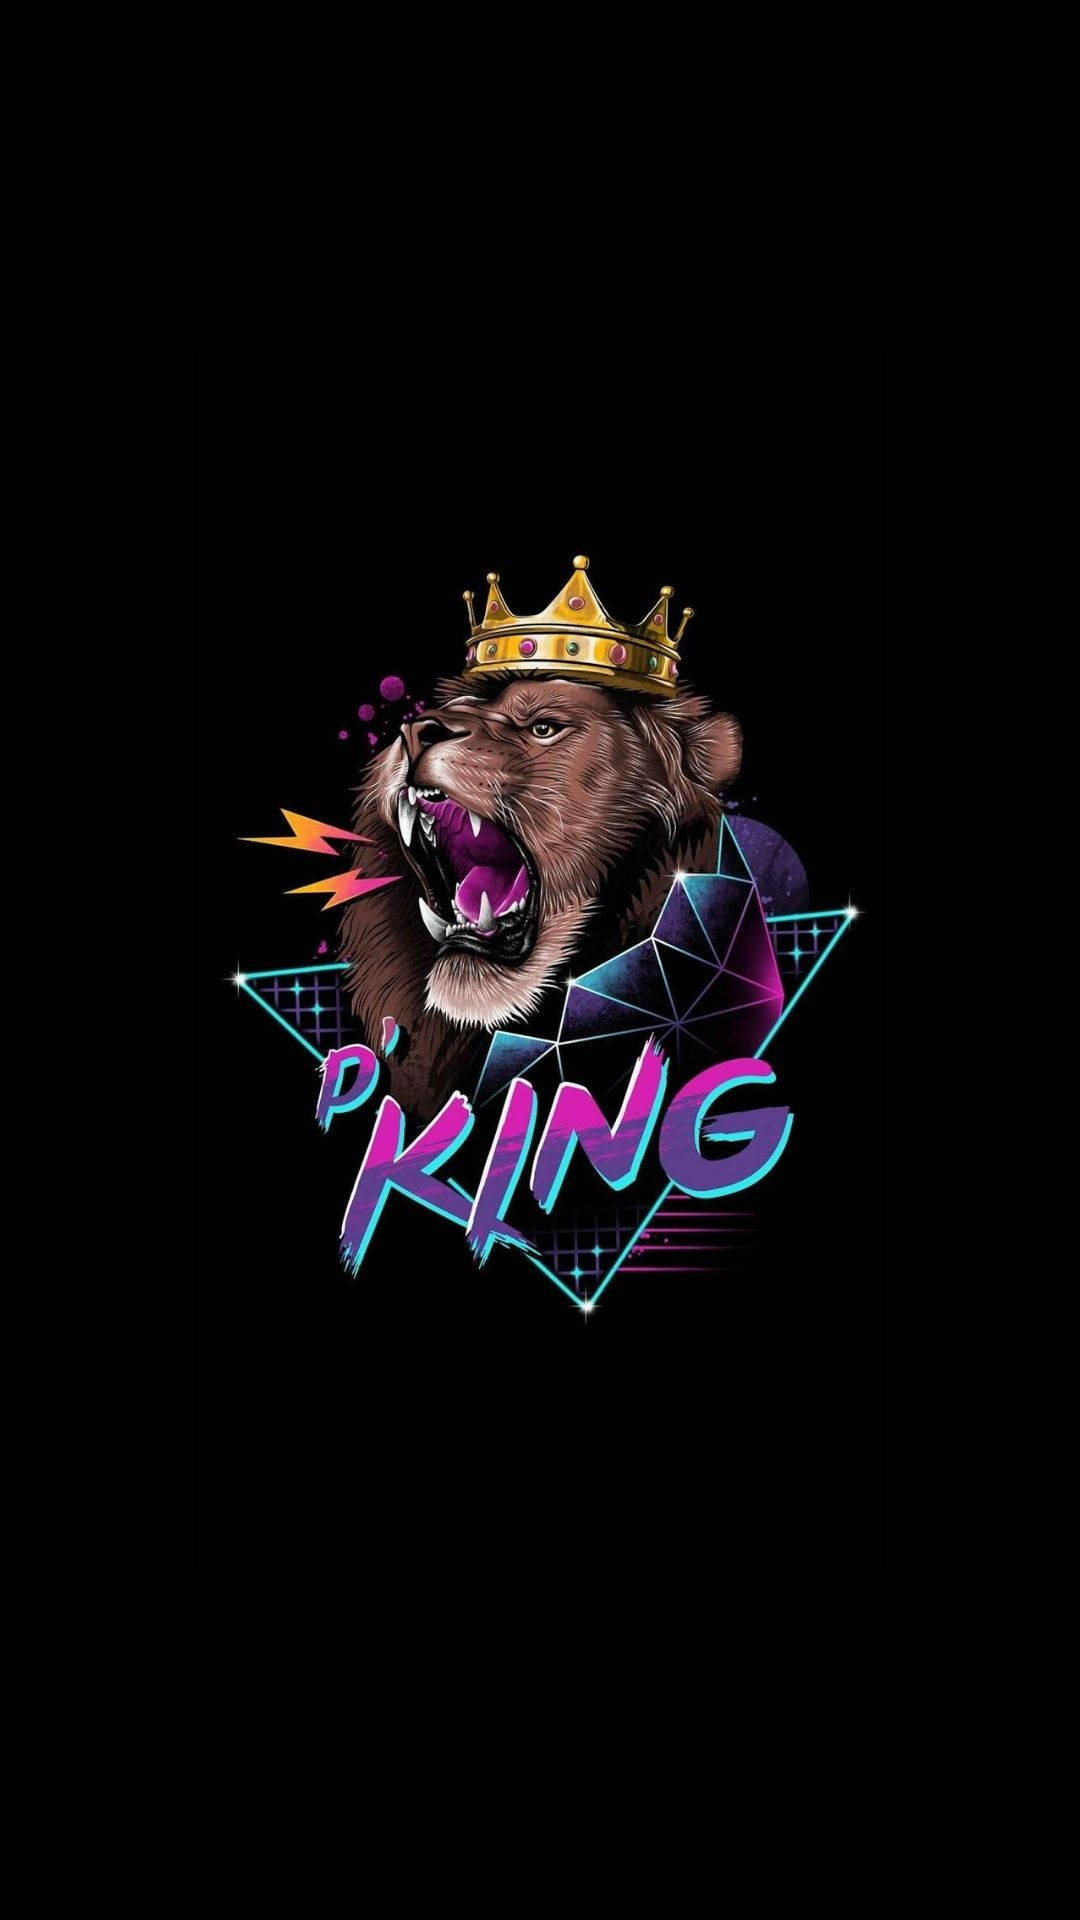 Free King Wallpaper Downloads, [200+] King Wallpapers for FREE | Wallpapers .com